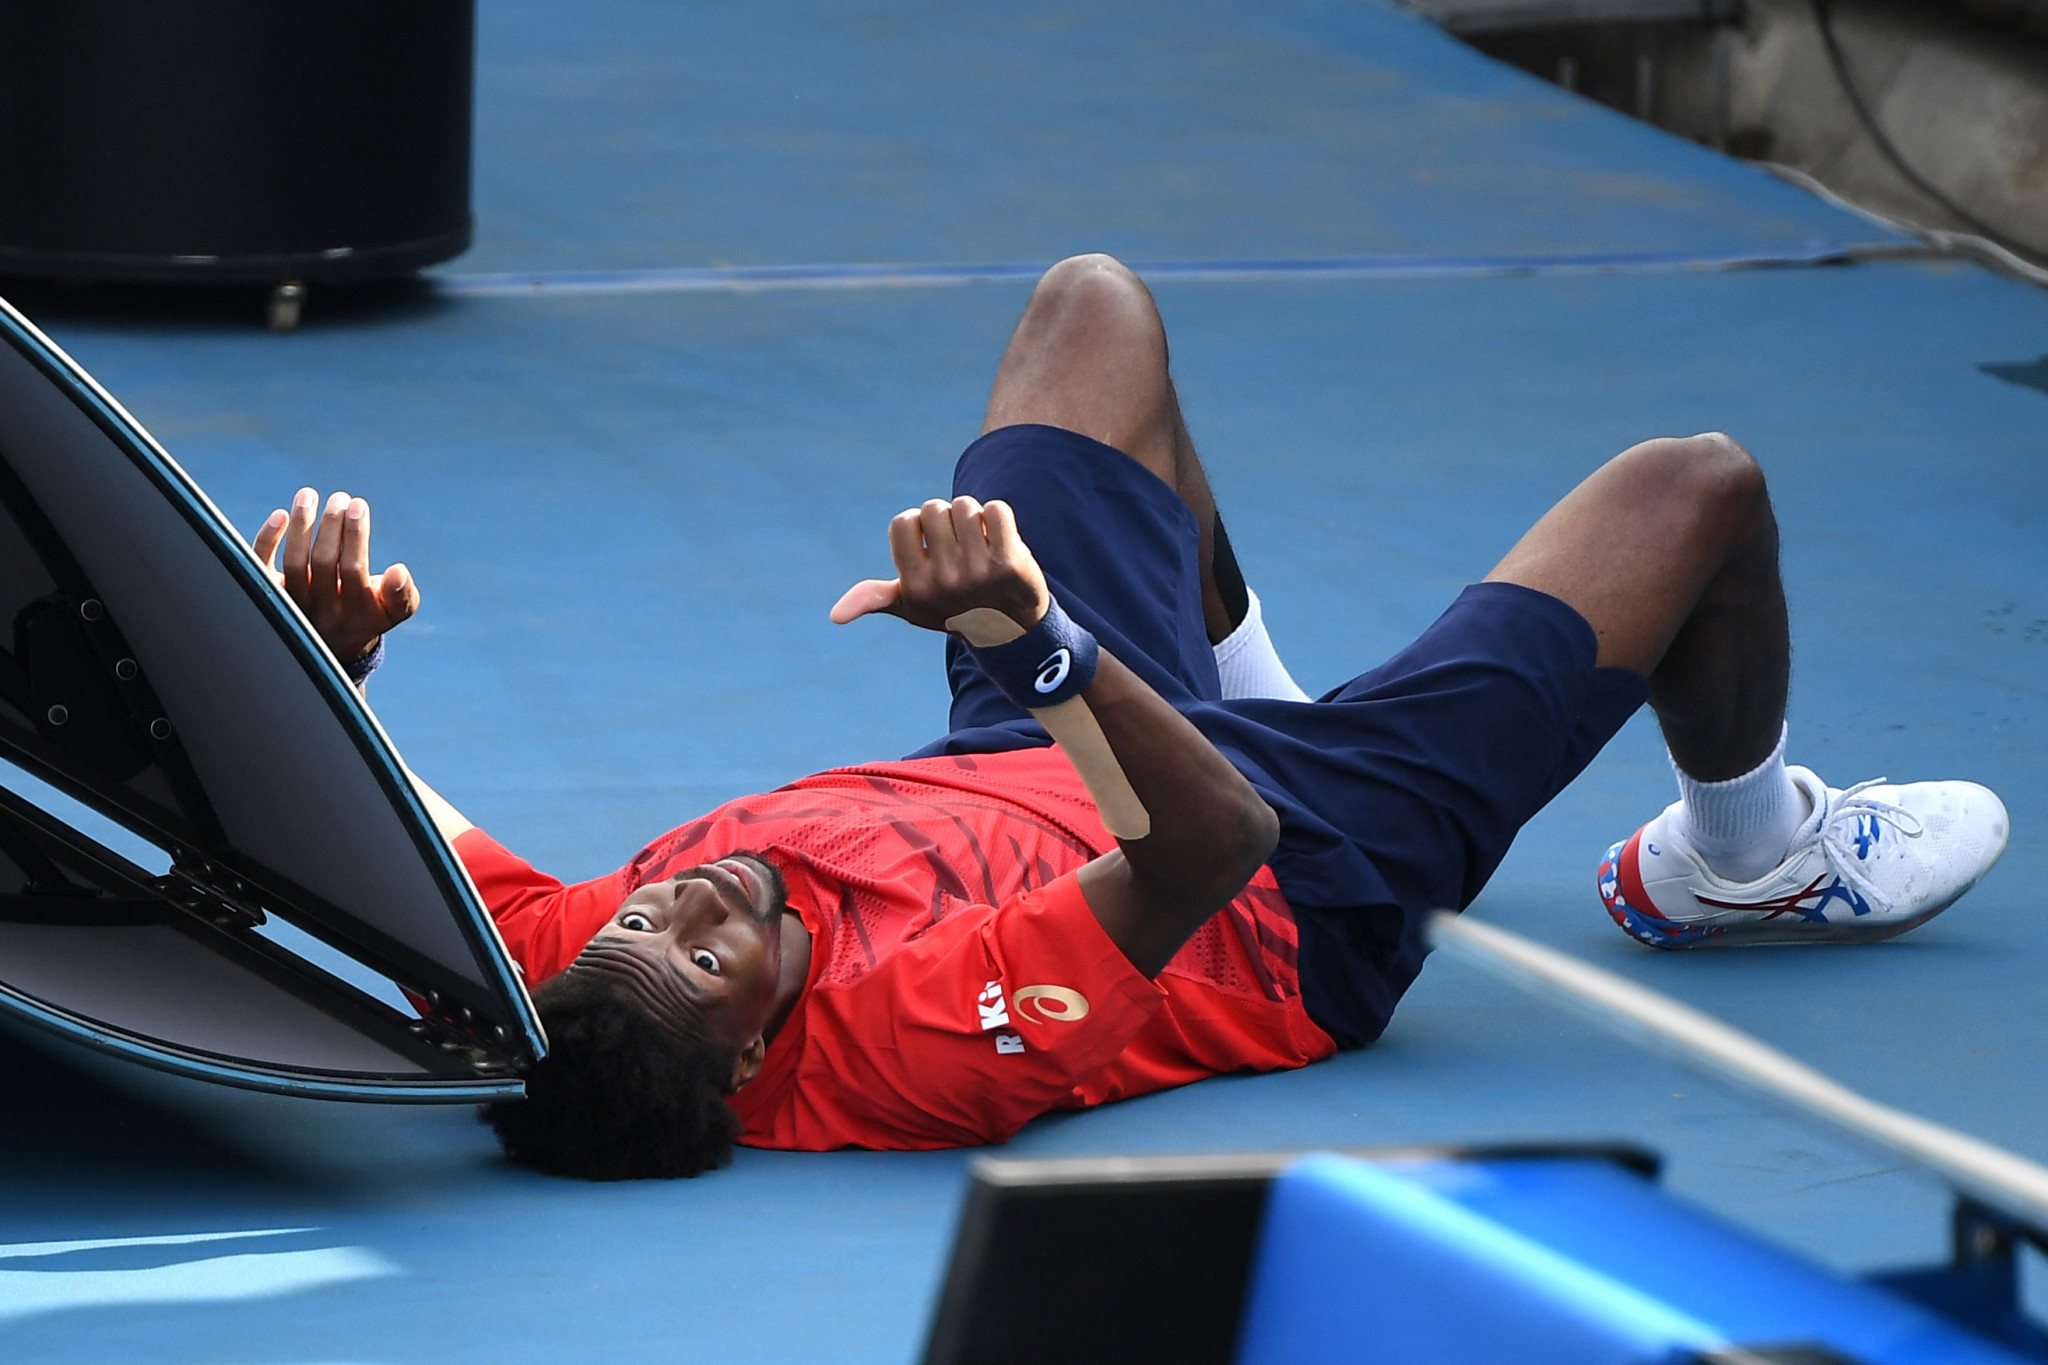 France's Gael Monfils gives the thumbs up after hitting the deck during his match ©Getty Images